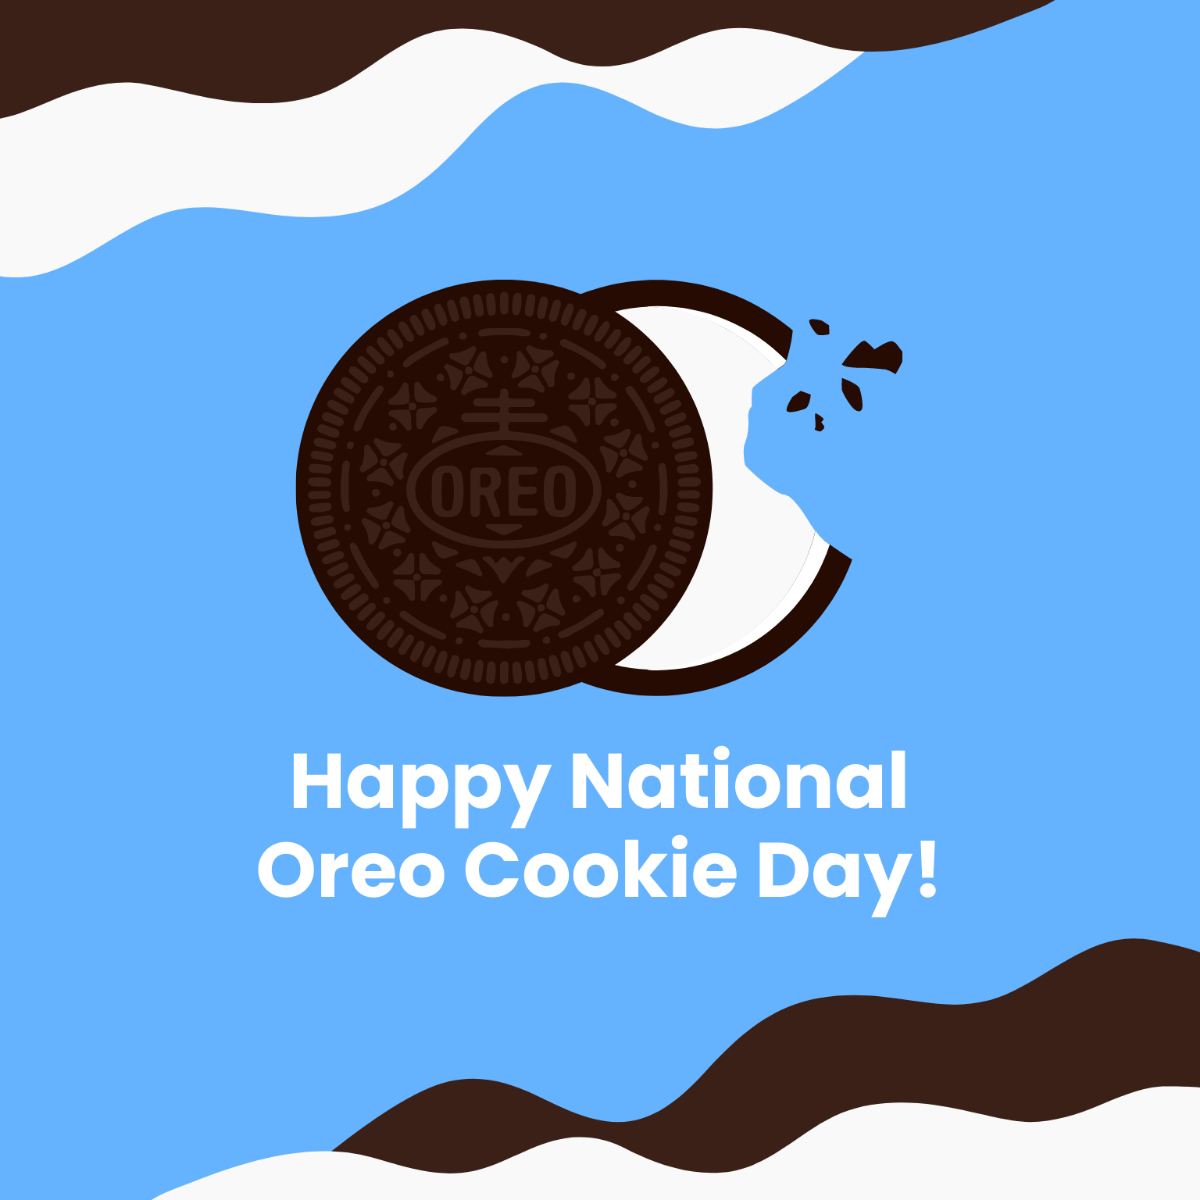 Happy National Oreo Cookie Day Illustration Template